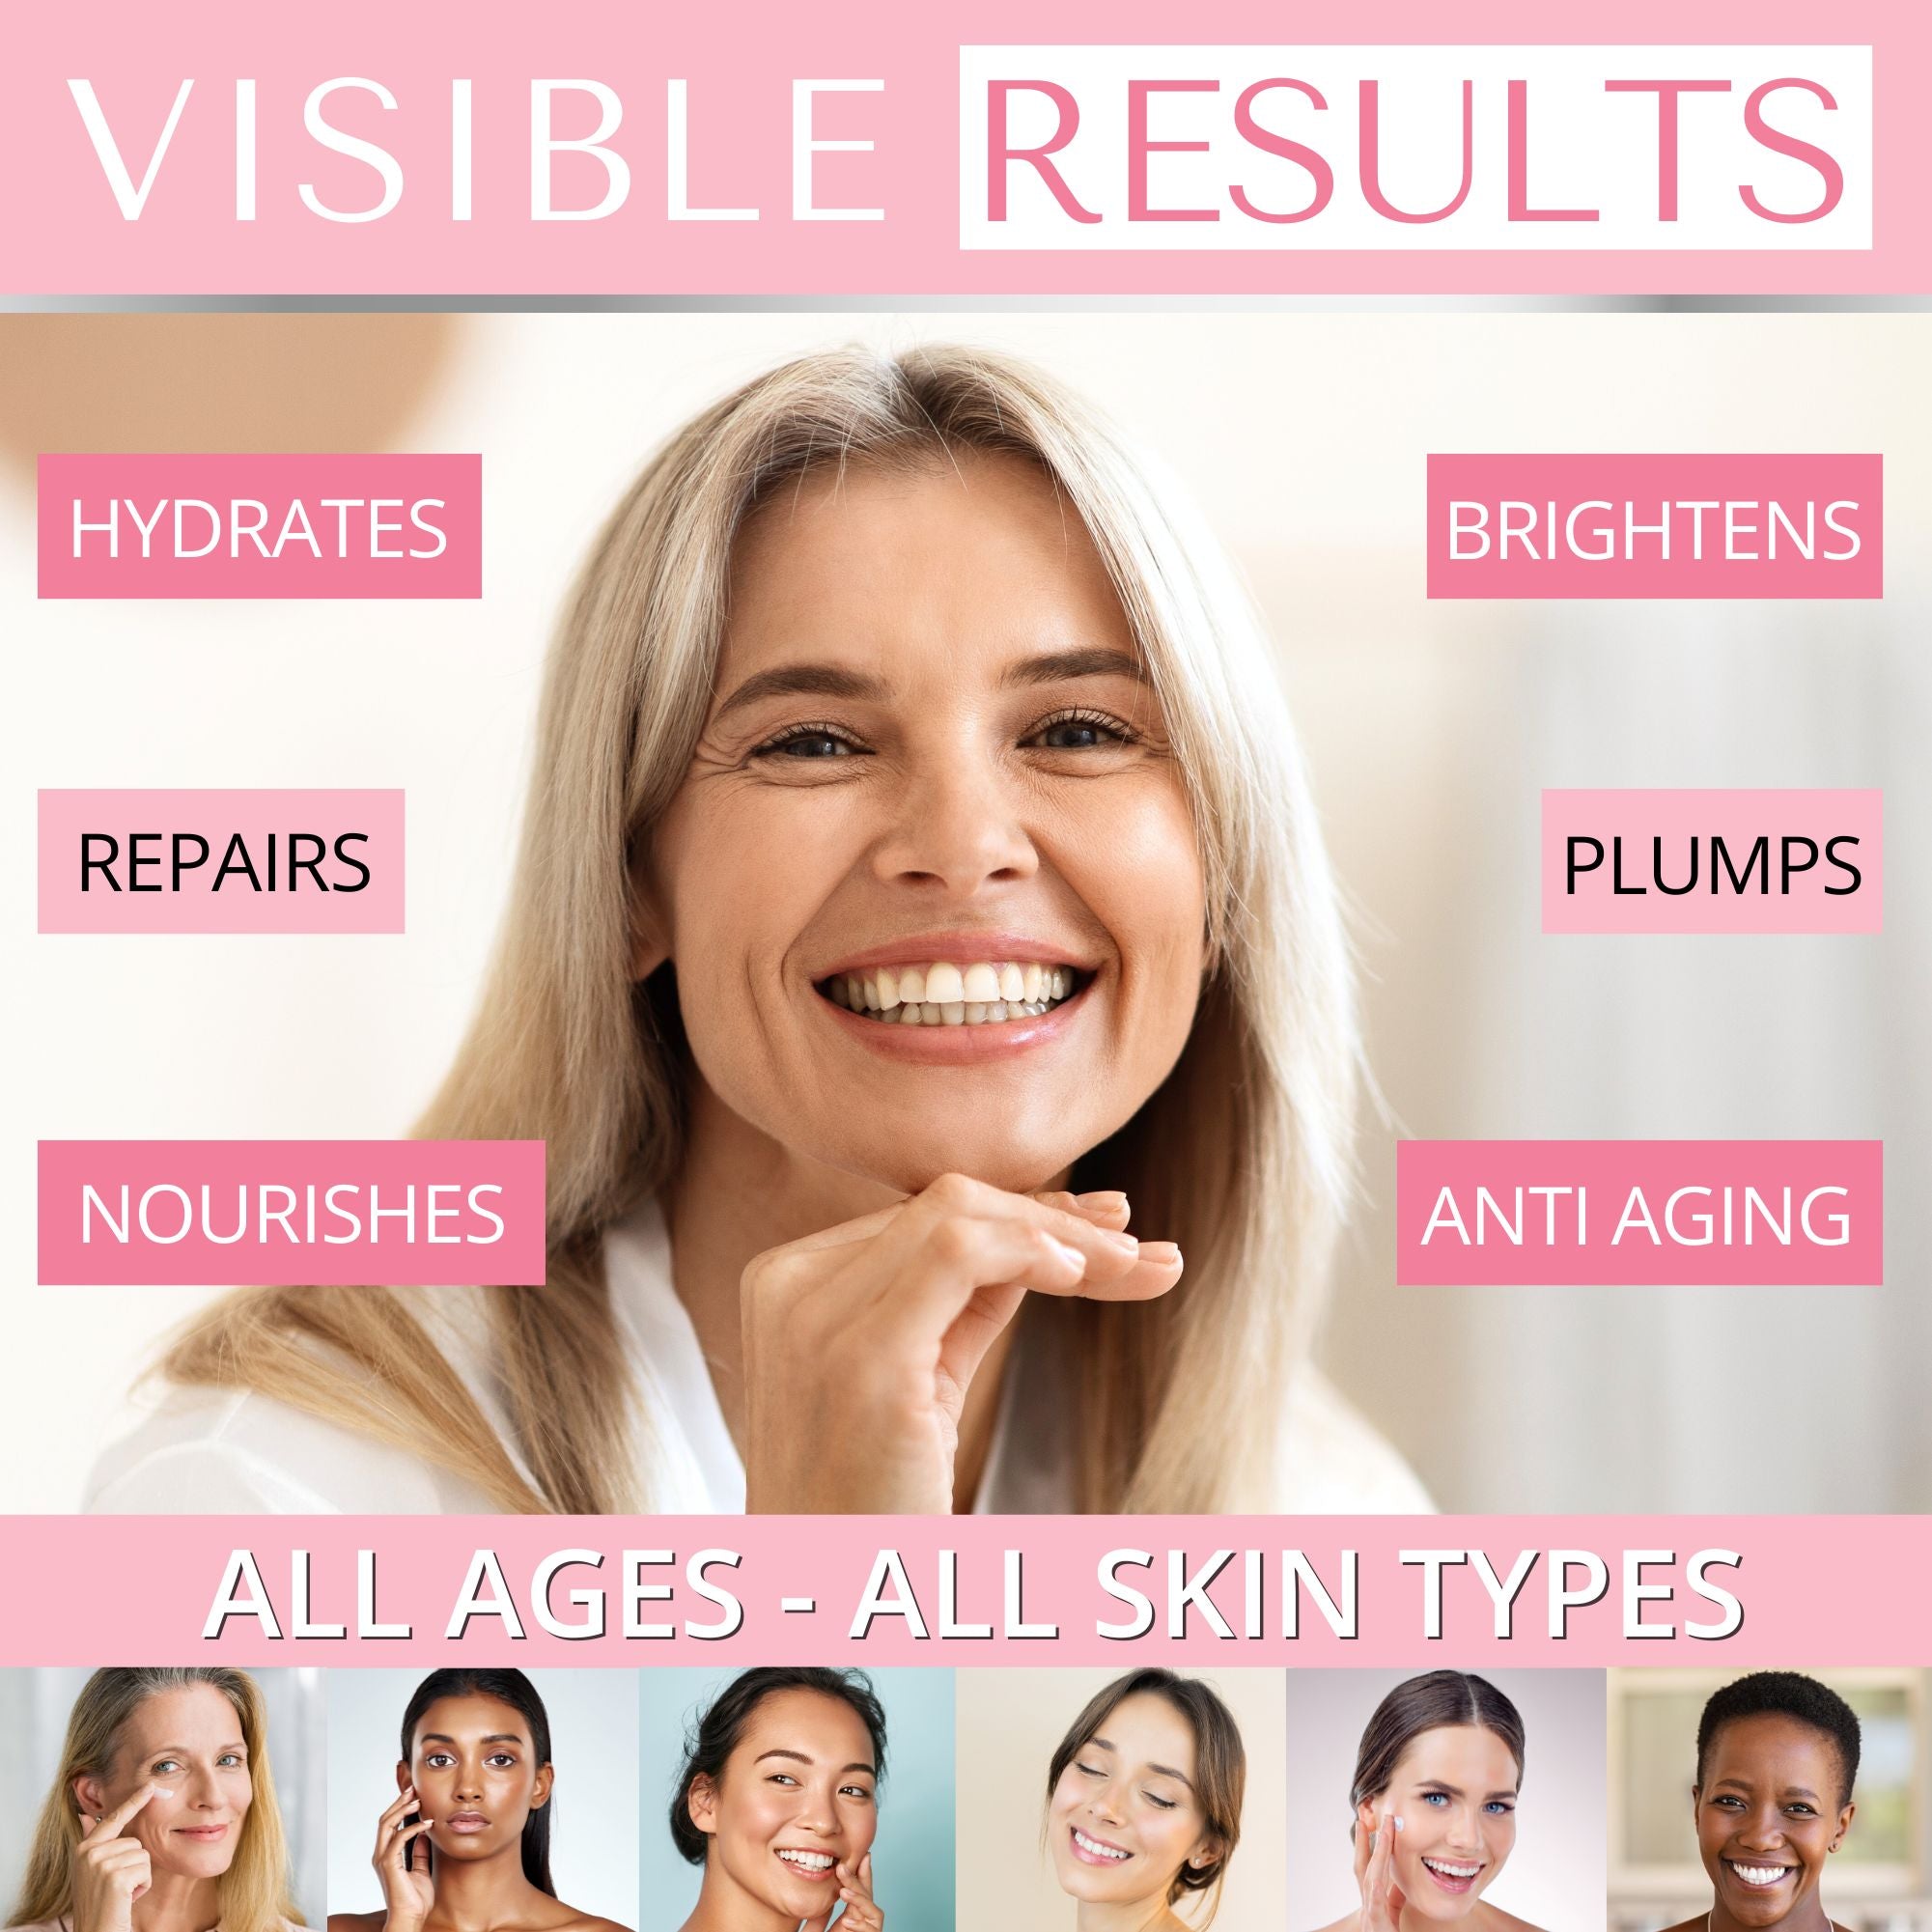 Visible results from Dermaworks moisturiser for women, anti-aging, nourishes, repairs, plumps, hydrates and brightens skin.